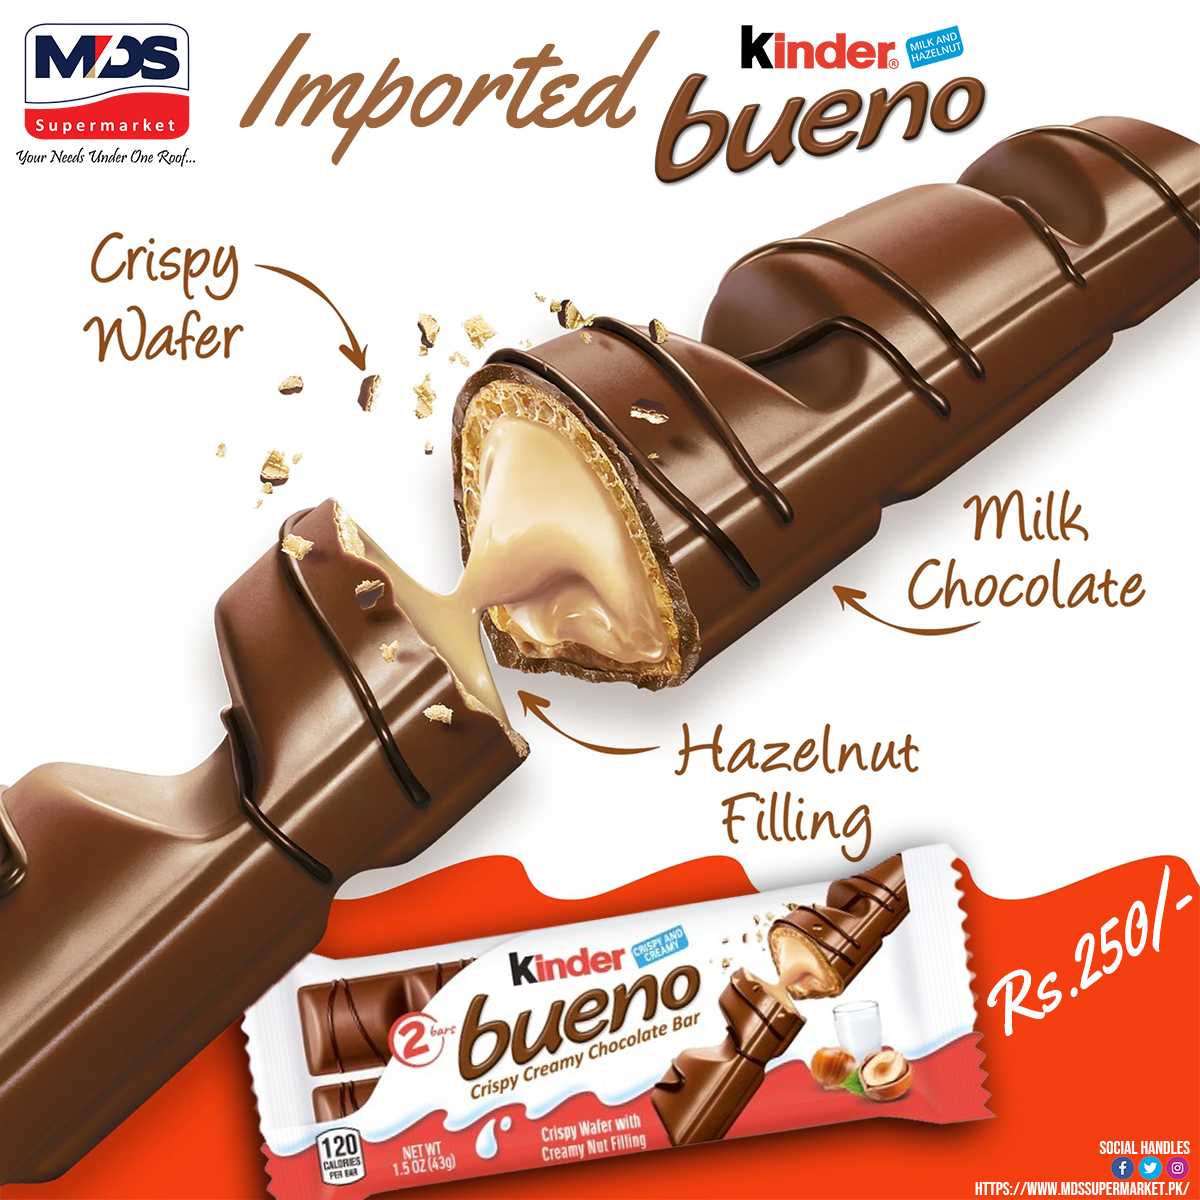 Enjoy 2 bars of this delightful treat for a perfect sweet snack. Available now at MDS Supermarket! 

📍 Visit us:
Branch 1: Toghi Road Quetta
📞 Phone: (081-2823444)
Branch 2: Quarry Road, Quetta
📞 Phone: (081-2823420)
#KinderBueno #Chocolate #Quetta #MDSupermarket #SweetTreats